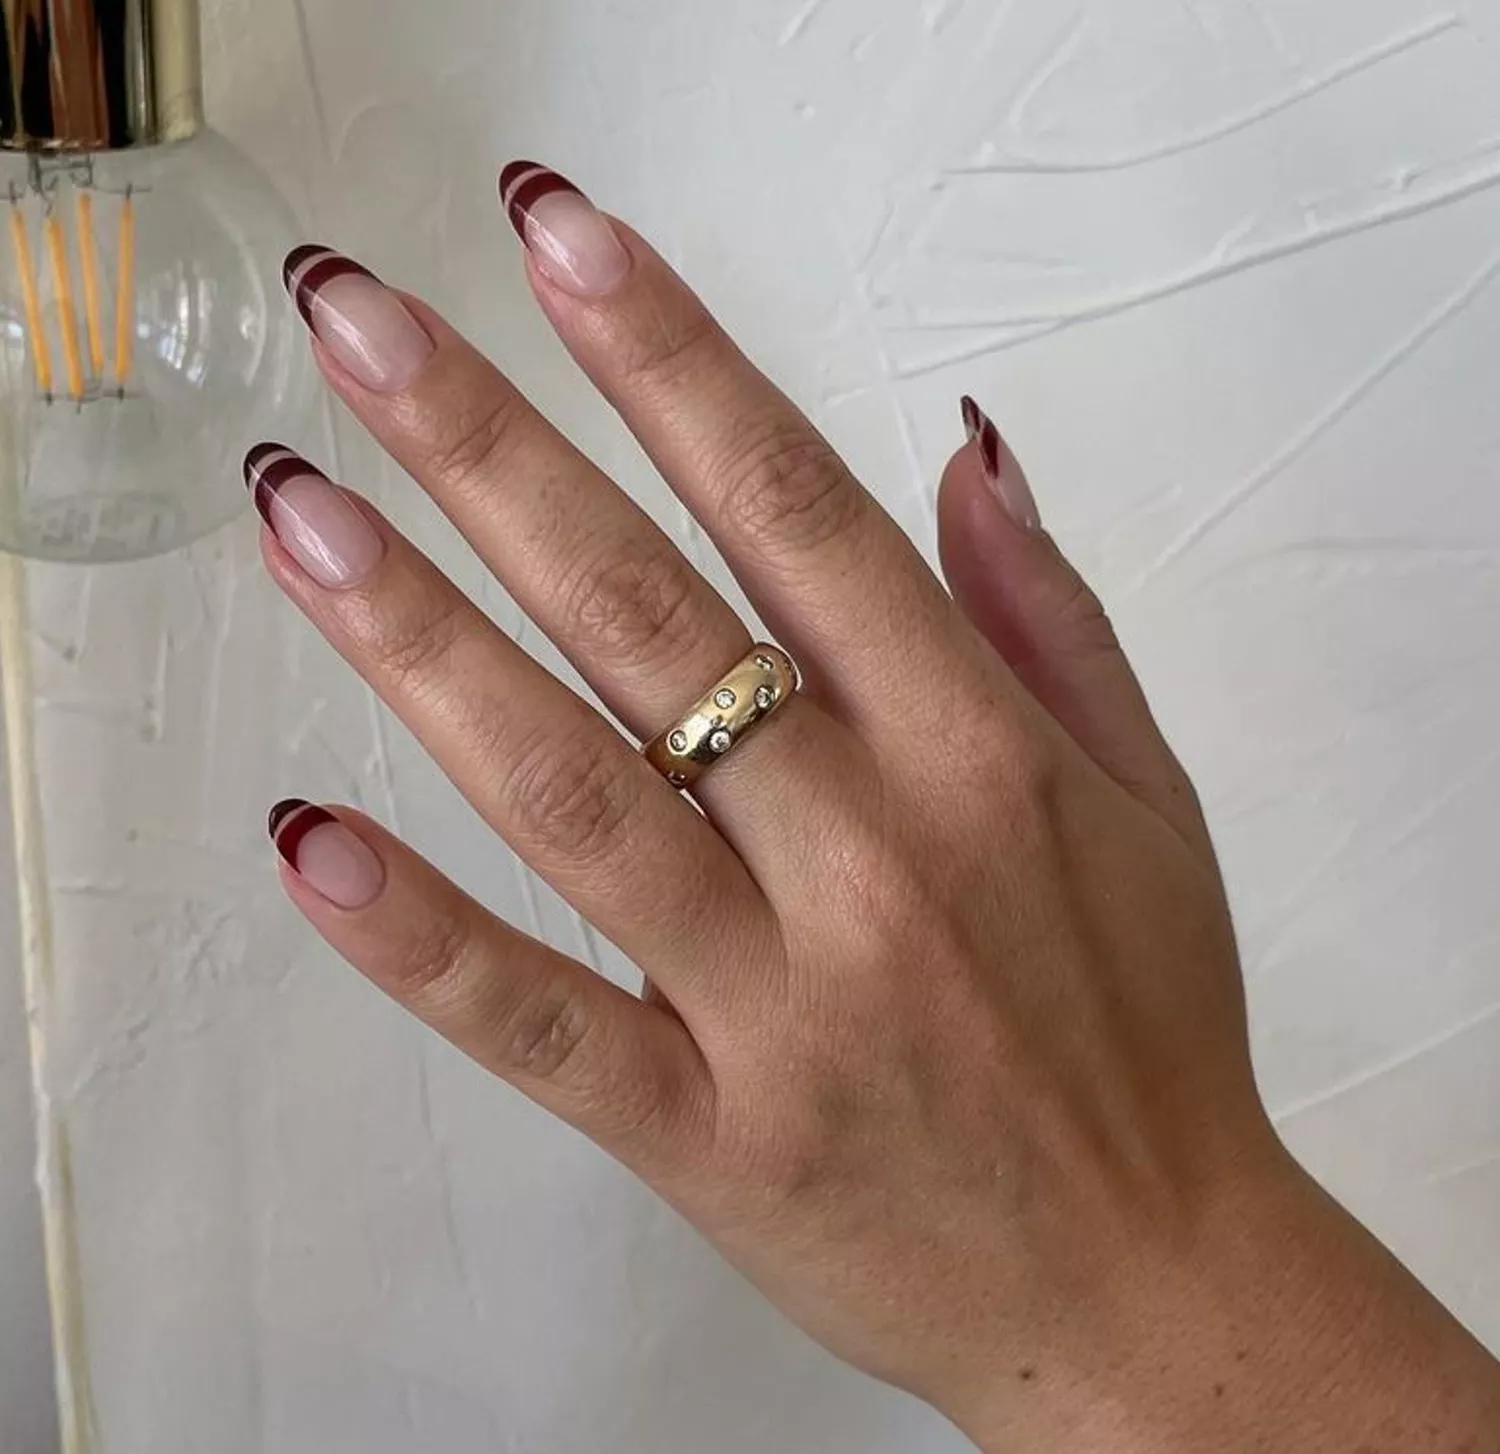 Nail Design Ideas: Double French(@saruhnails / Instagram)